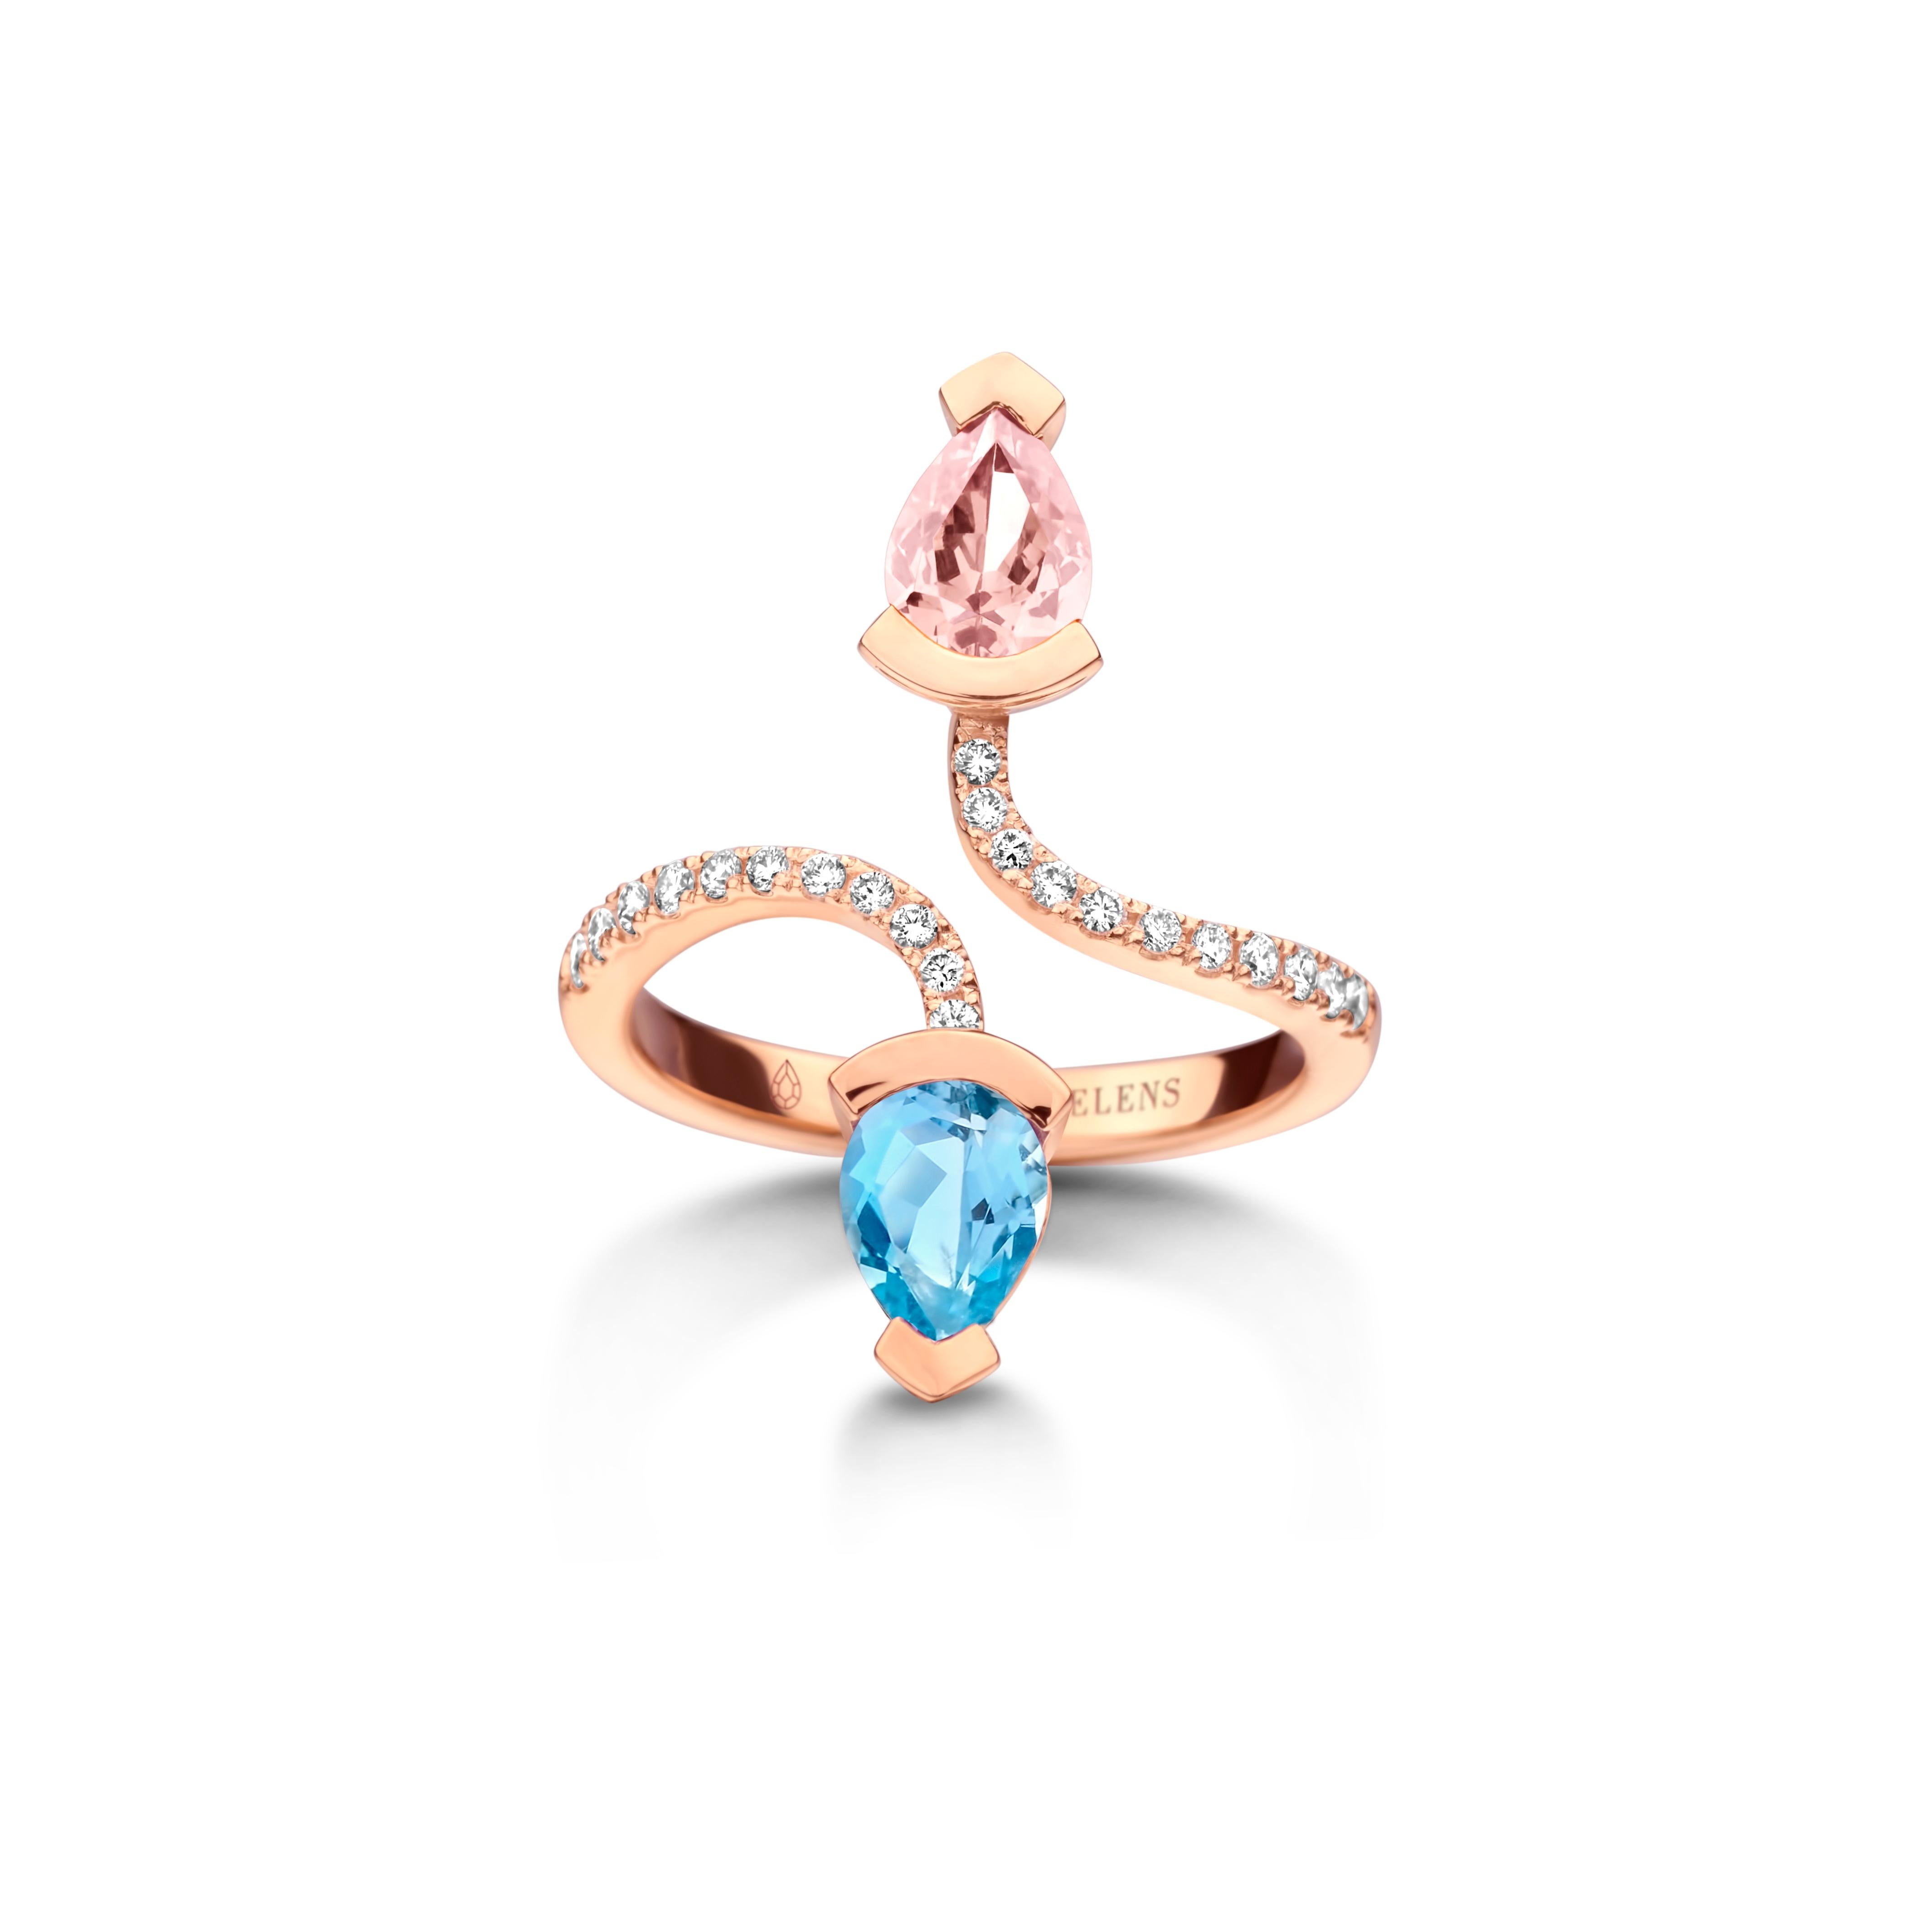 Adeline Duo ring in 18Kt yellow gold 5g set with a pear-shaped Aquamarine 0,70 Ct, a pear-shaped morganite 0,70 Ct and 0,19 Ct of white brilliant cut diamonds - VS F quality. Celine Roelens, a goldsmith and gemologist, is specialized in unique, fine